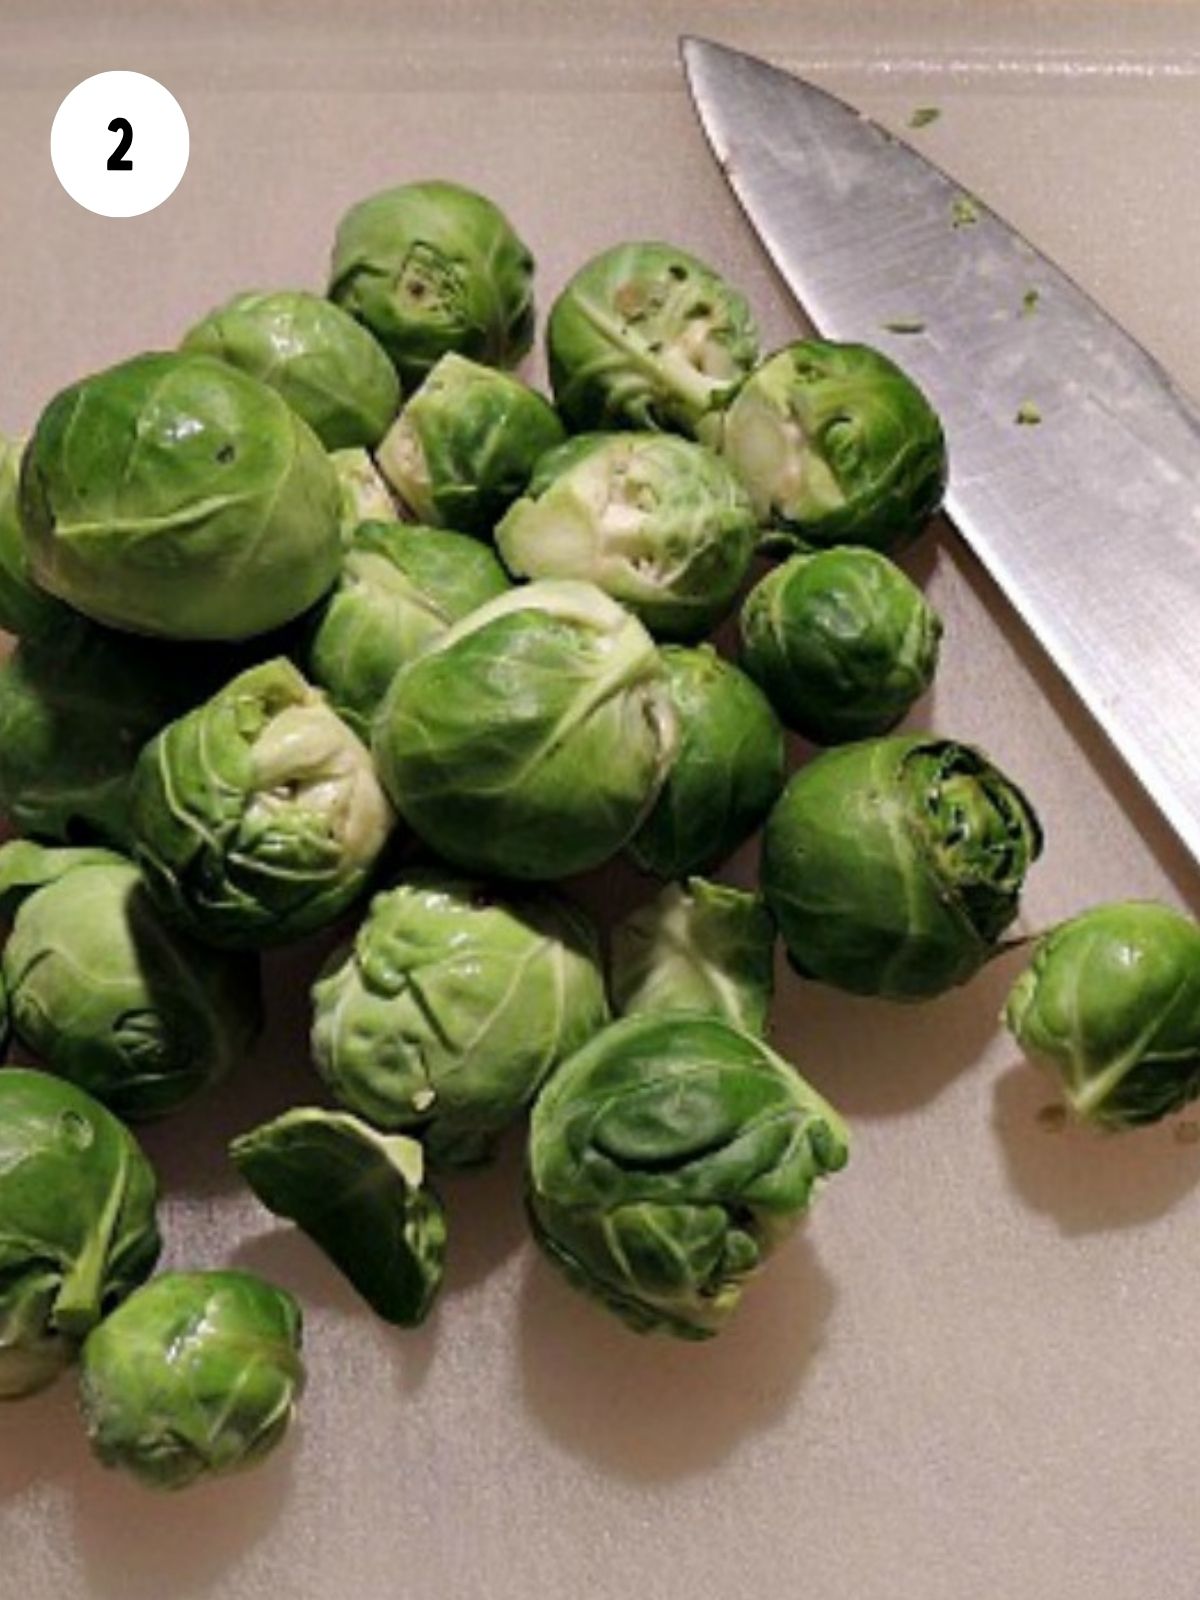 Prepare Brussels sprouts on cutting board with knife.